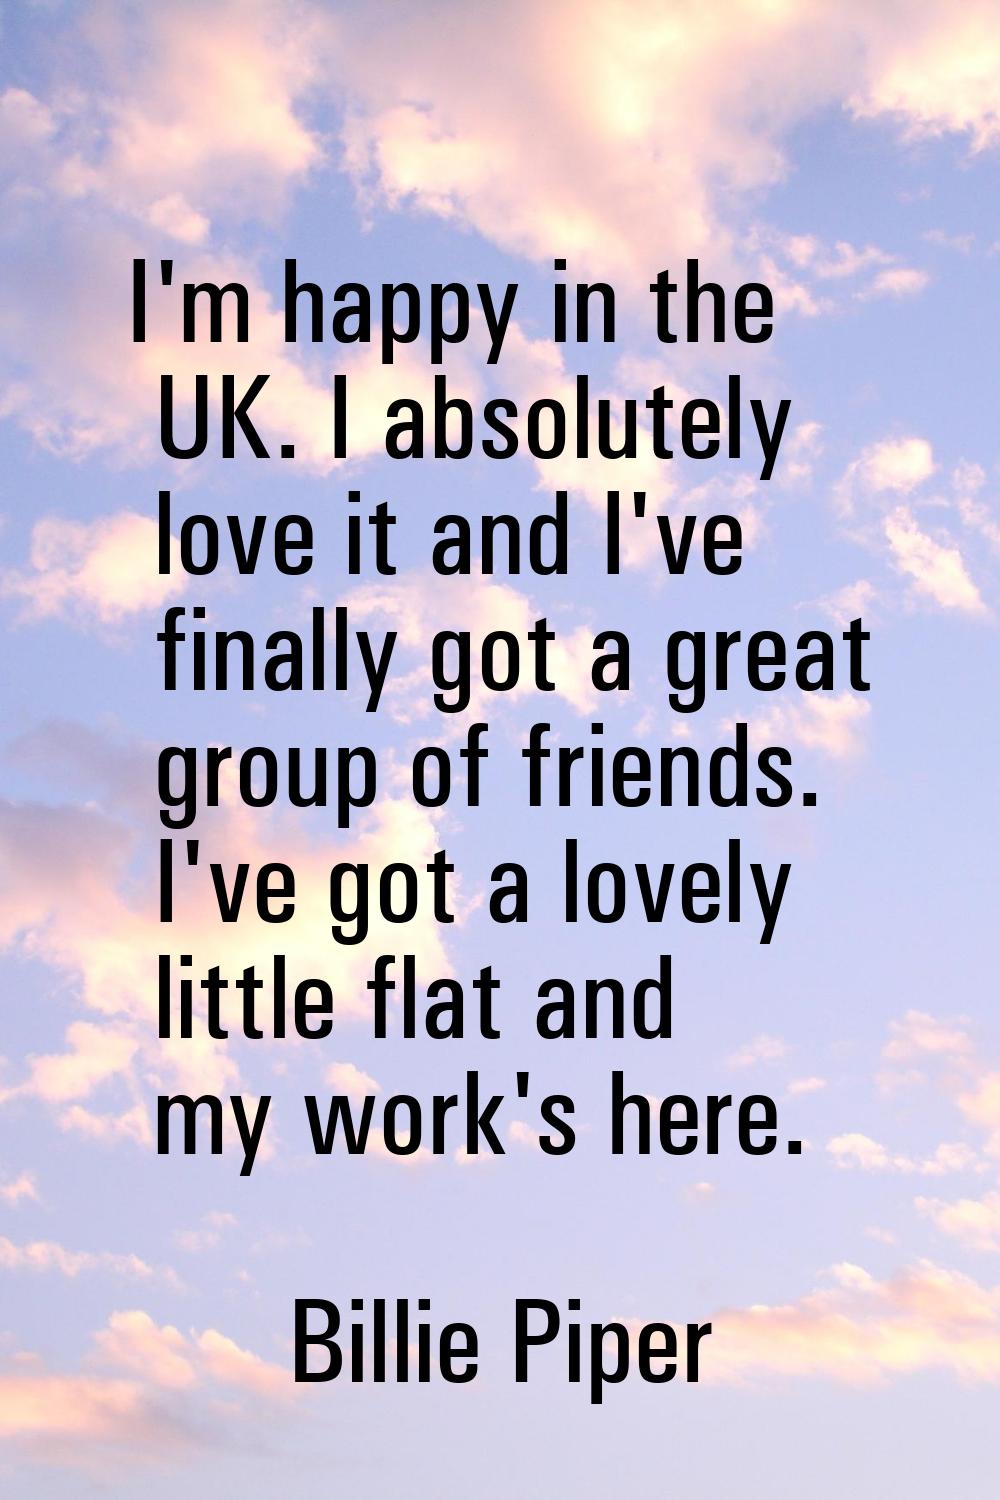 I'm happy in the UK. I absolutely love it and I've finally got a great group of friends. I've got a